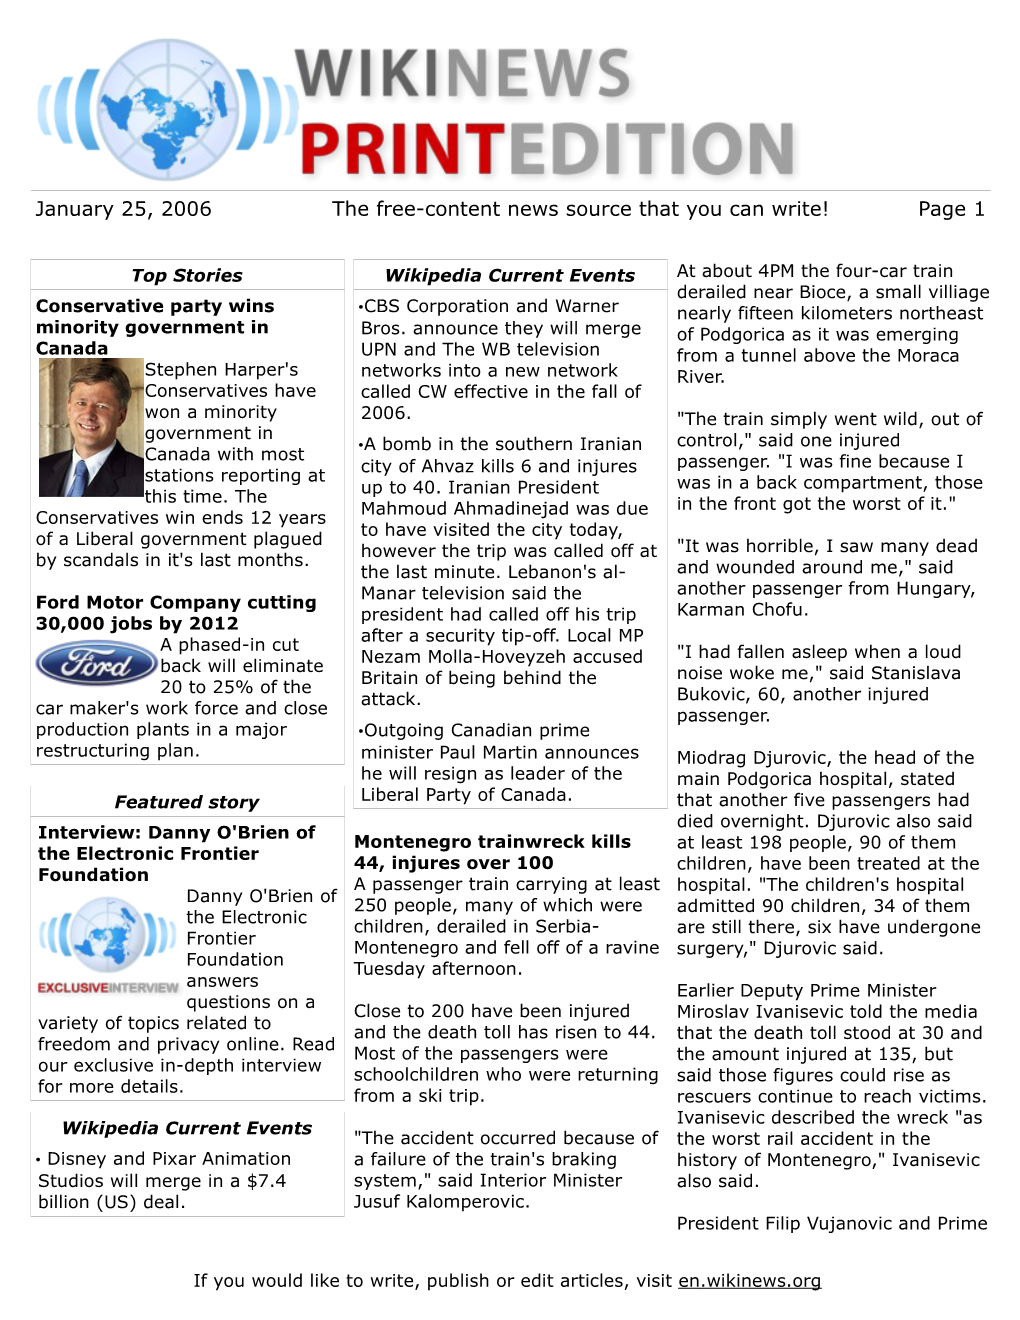 January 25, 2006 the Free-Content News Source That You Can Write! Page 1